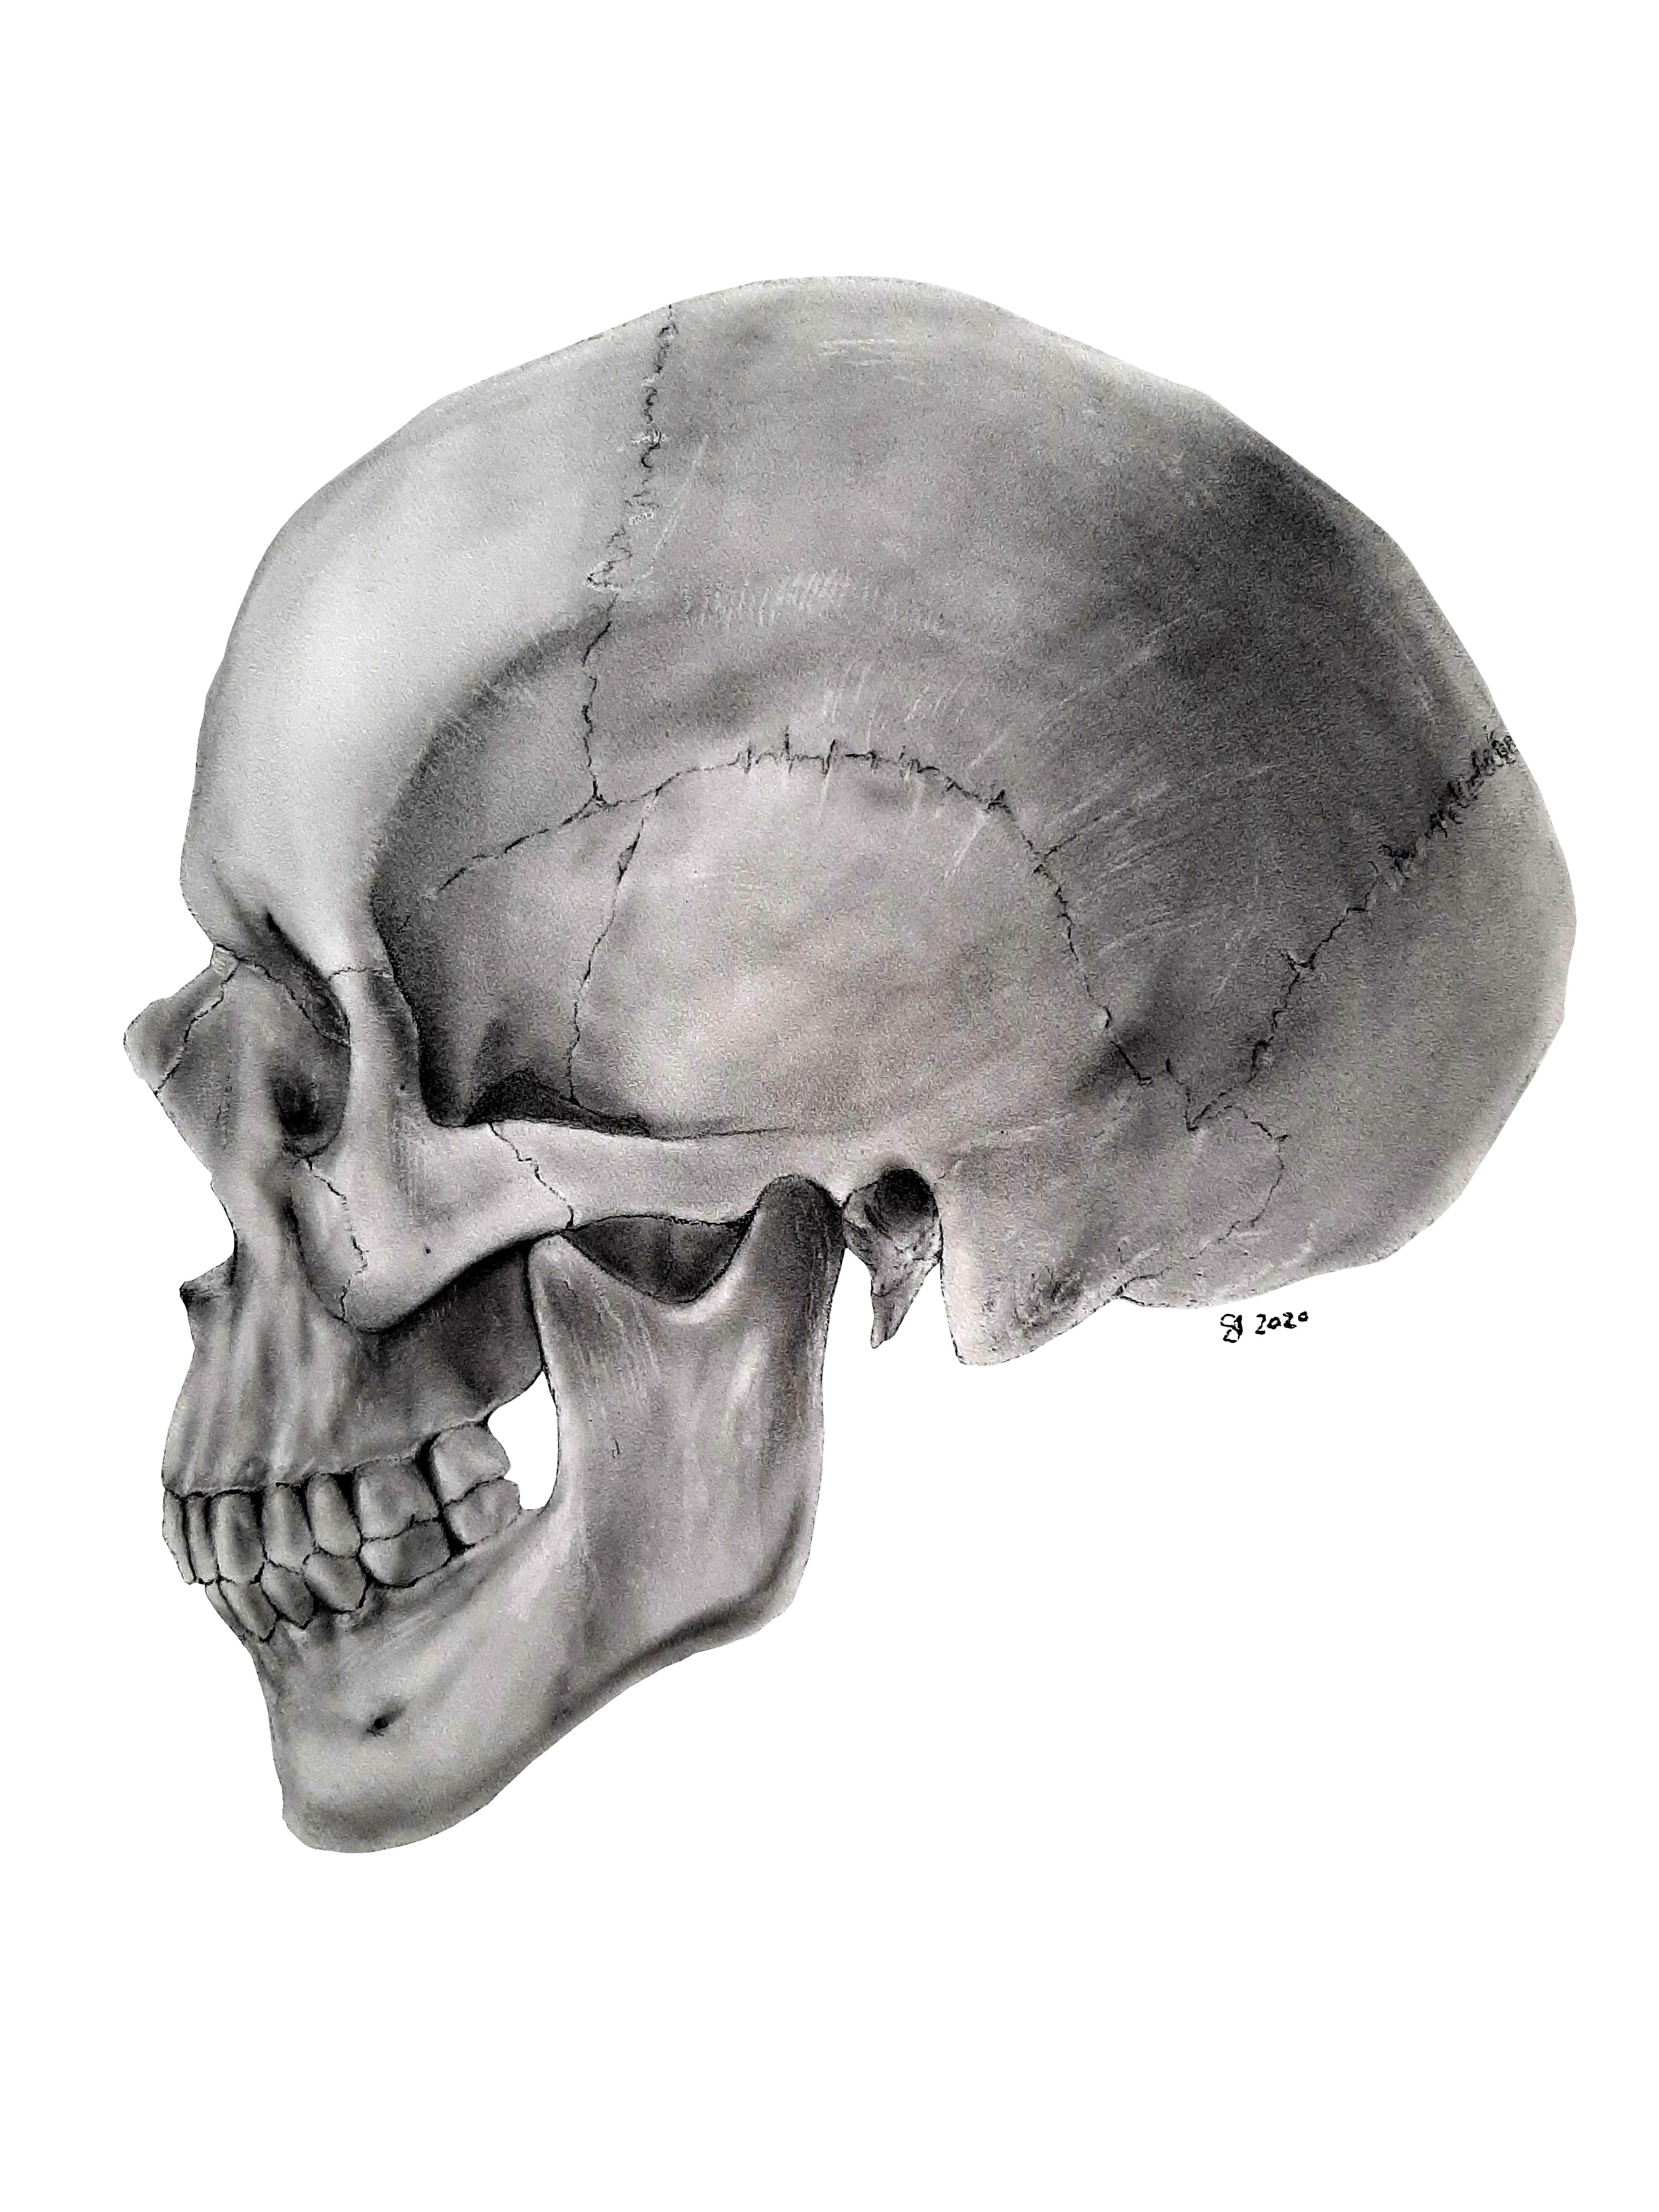 Lateral skull after edits in photoshop